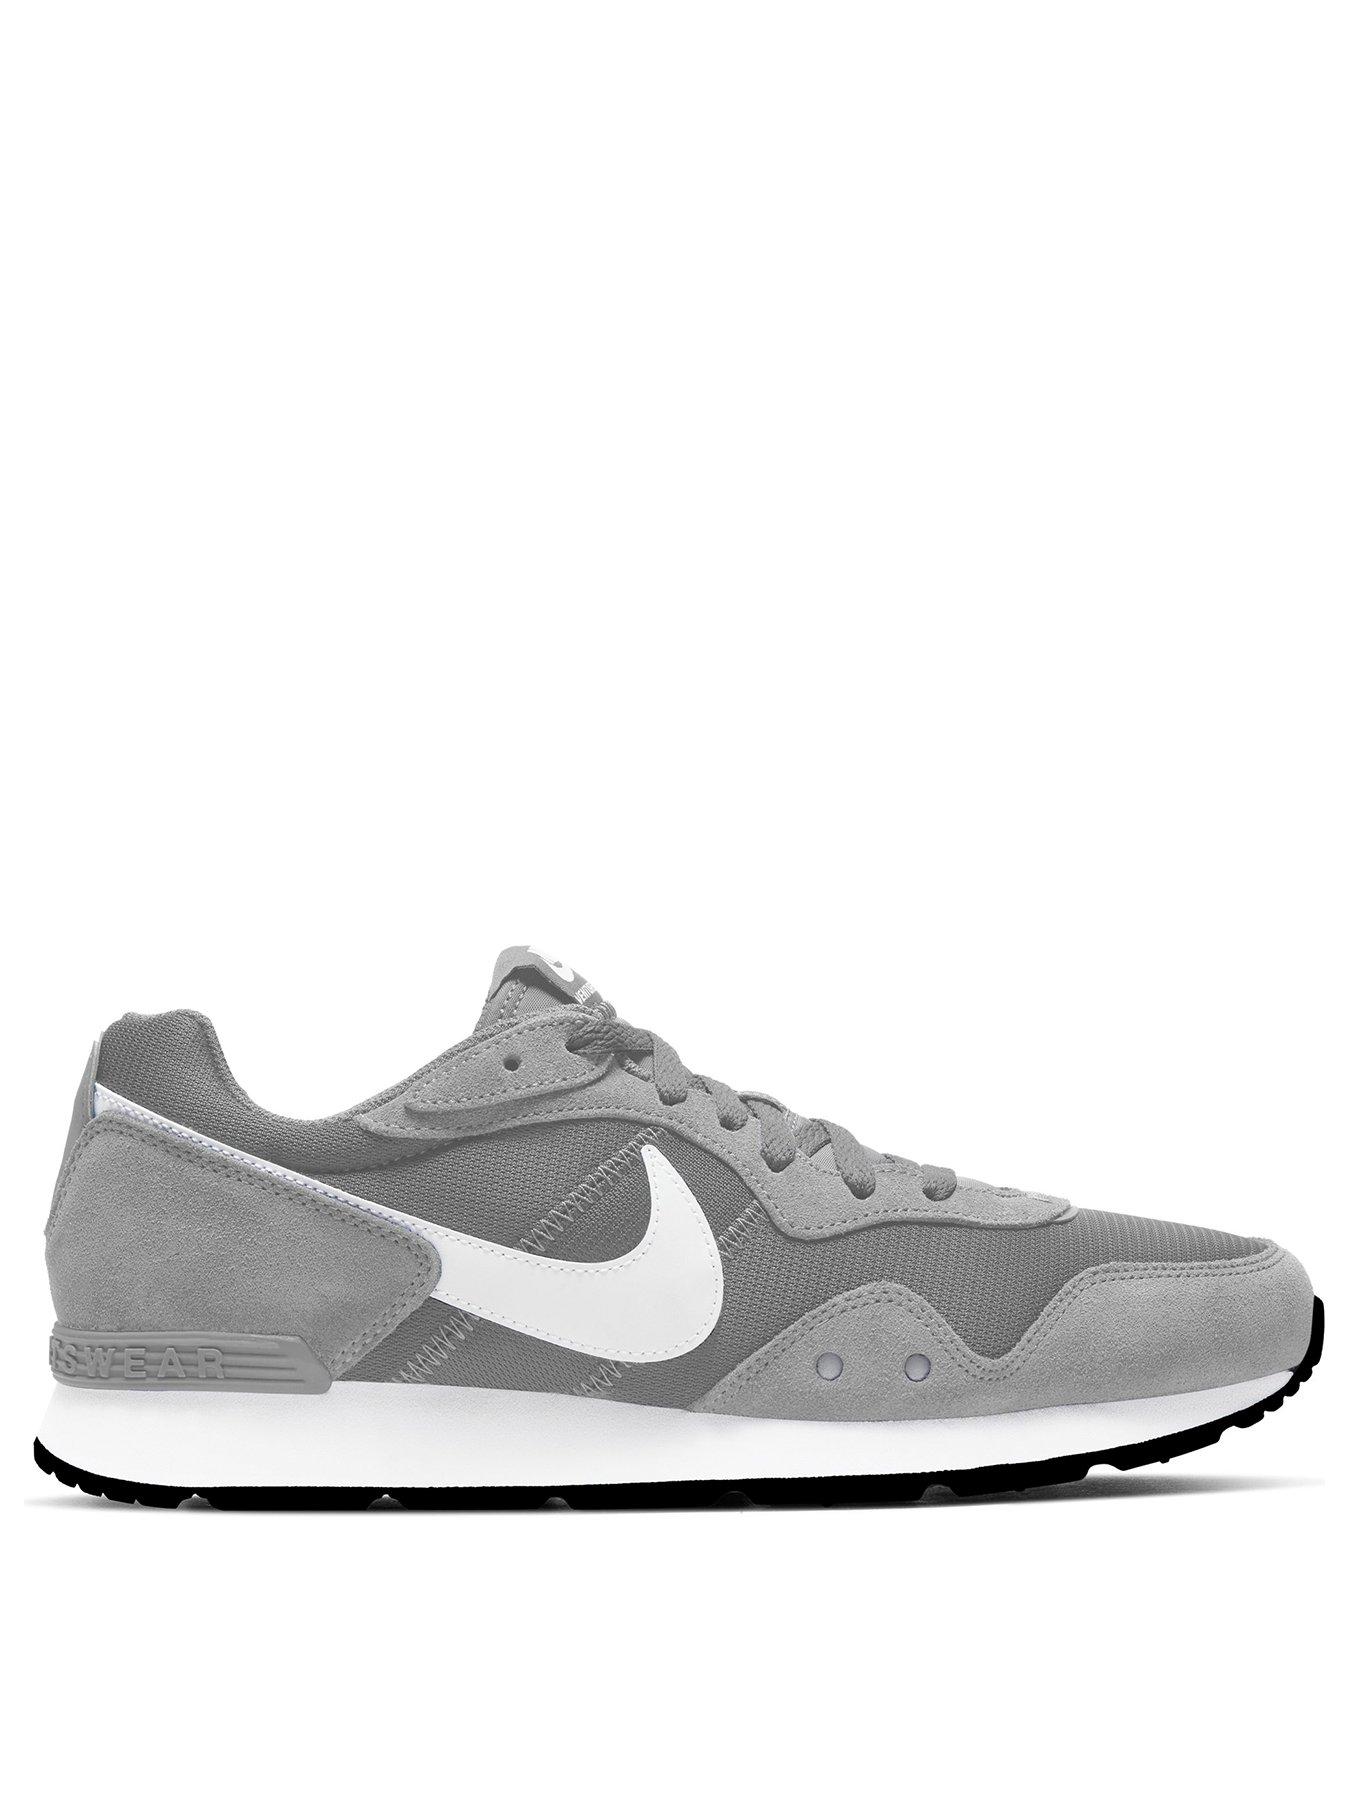 Men's Running Shoes | Trainers 